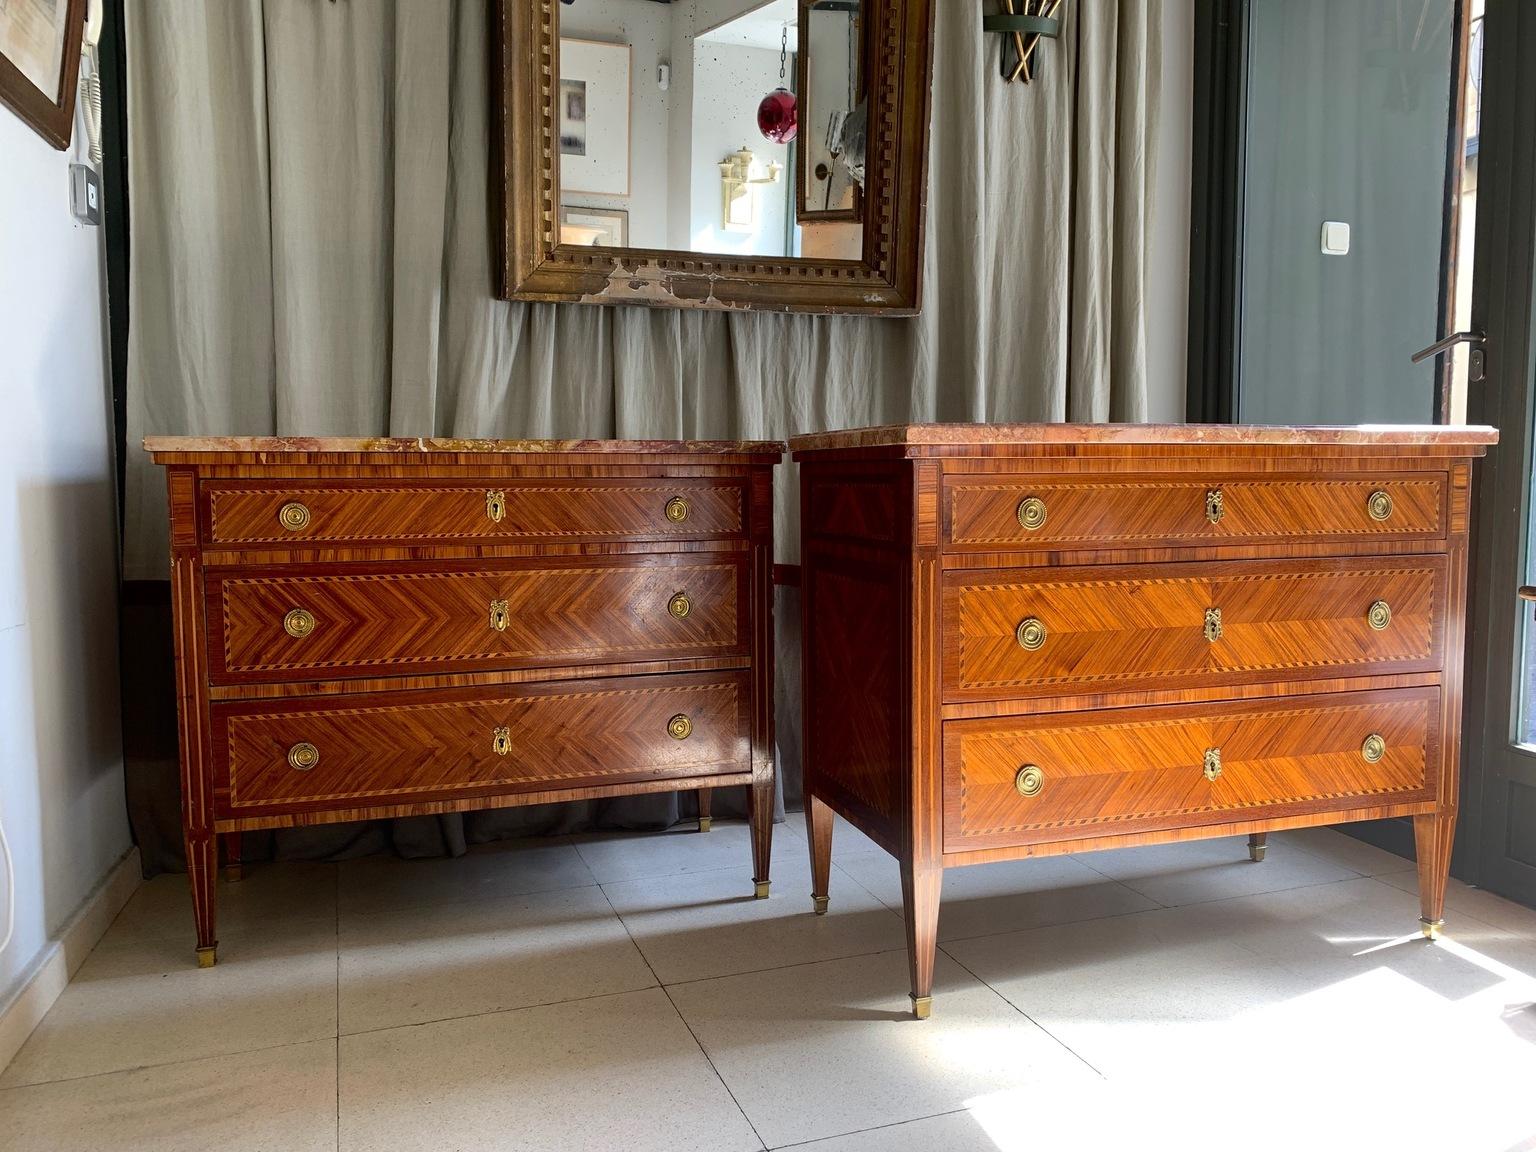 An elegant pair of French commodes, in Louis XVI style, made of fruitwood mahogany and marquetry work. the interior is valmunt,
Each of the dressers have three drawers with gilt bronze handles and keyholes.
The tops are made of marble, one slightly